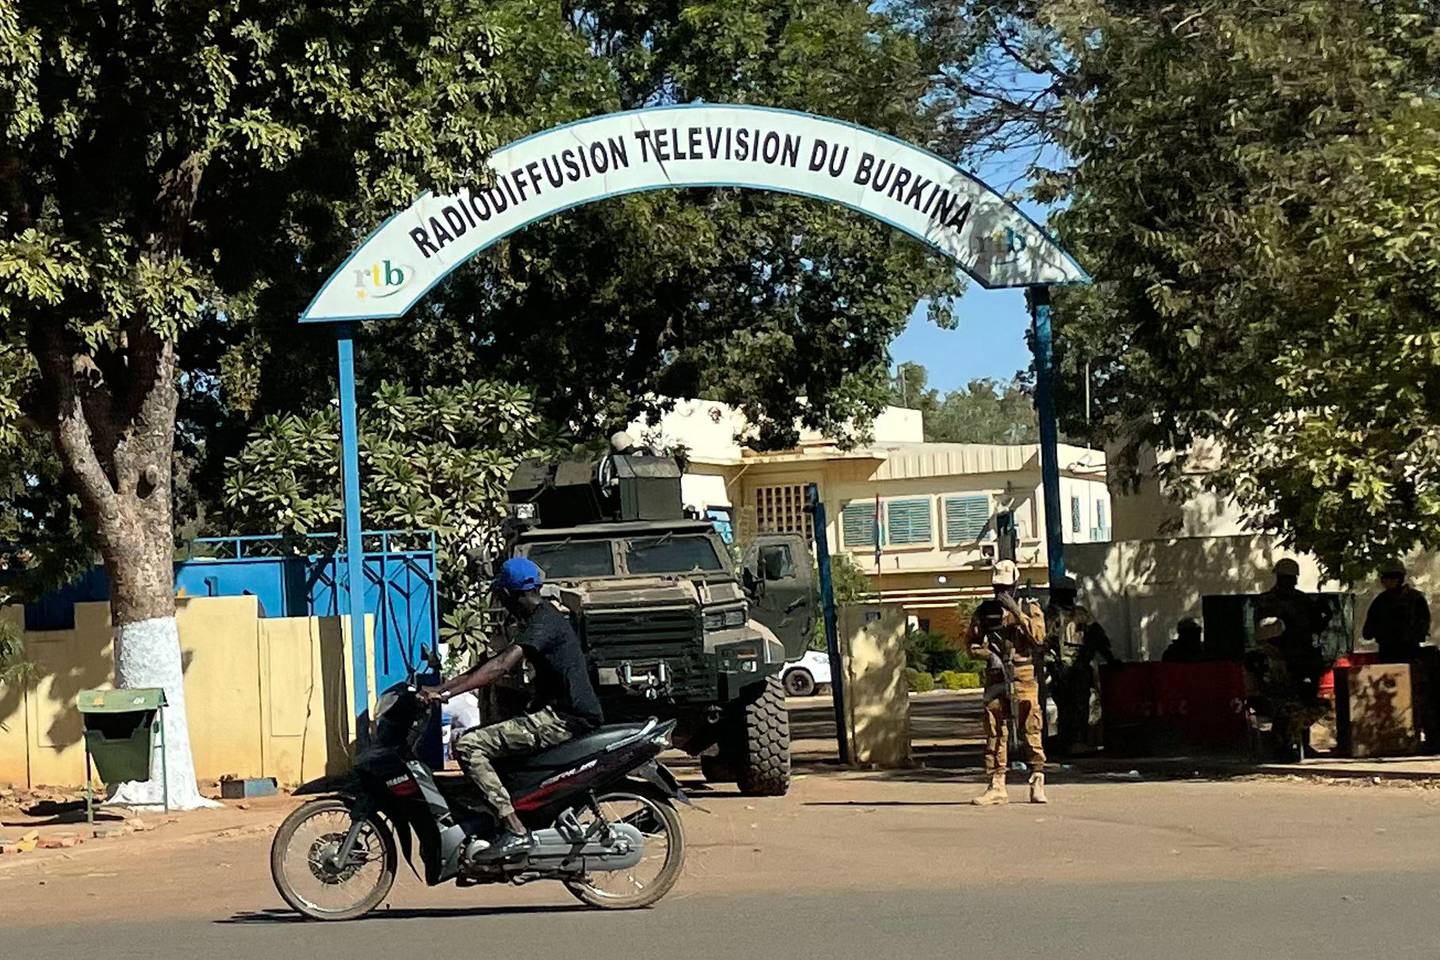 Burkina Faso soldiers outside the National TV centre in Ouagadougou. Mutinous troops in Burkina Faso arrested and detained President Roch Marc Christian Kabore and his ministers on Monday, demanding more resources for the battle against extremists. AFP